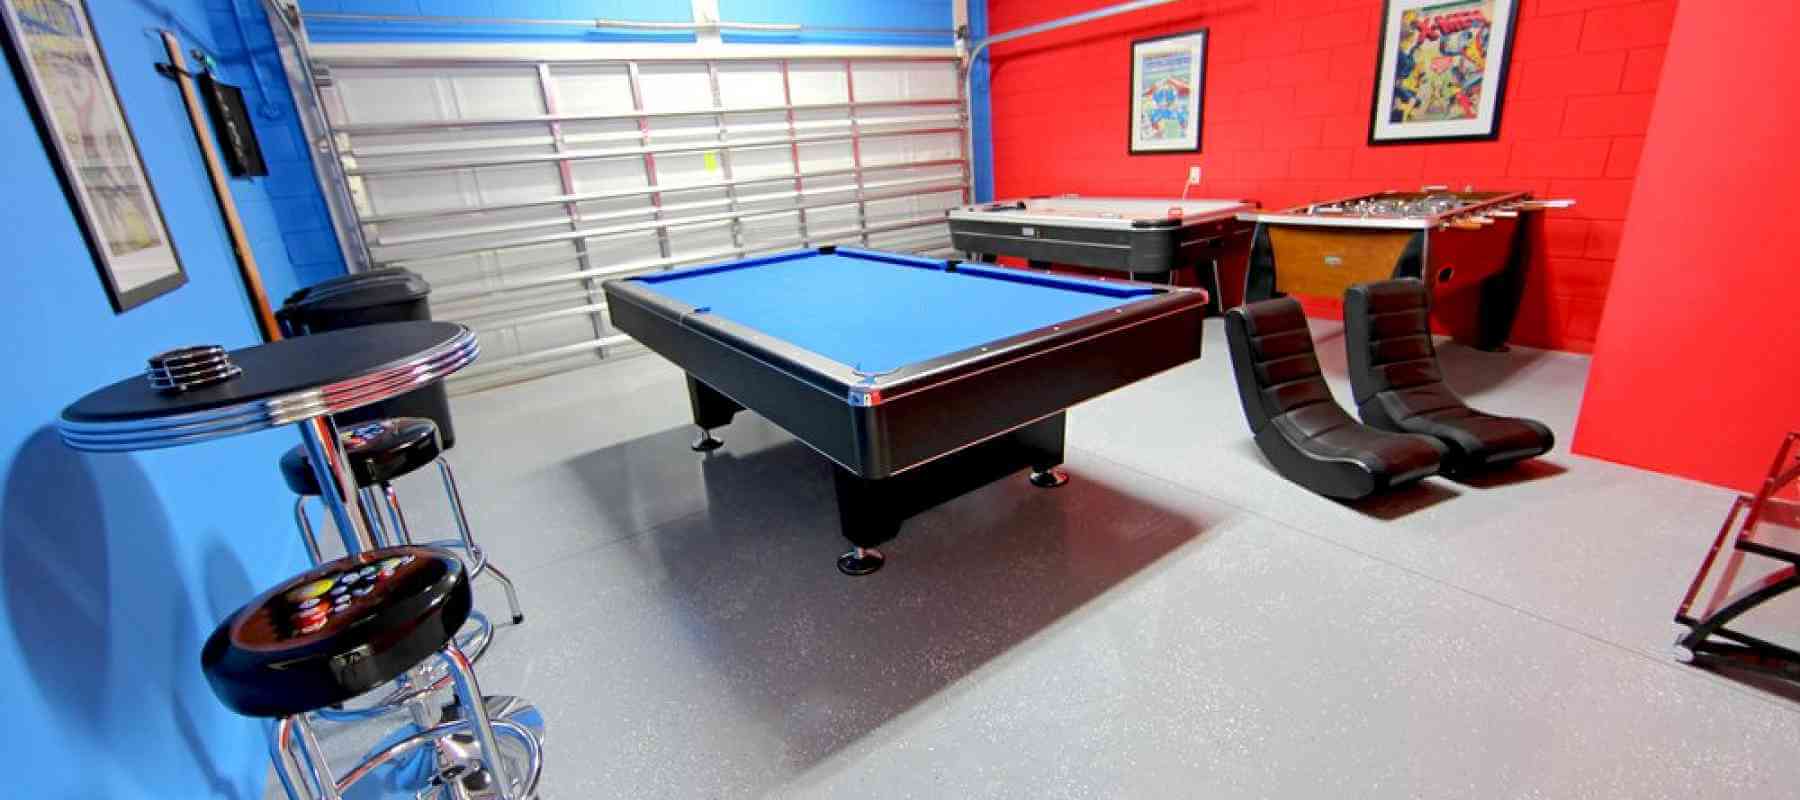 How to Turn Your Garage into a Game Room: Cool Ideas for Making It Happen